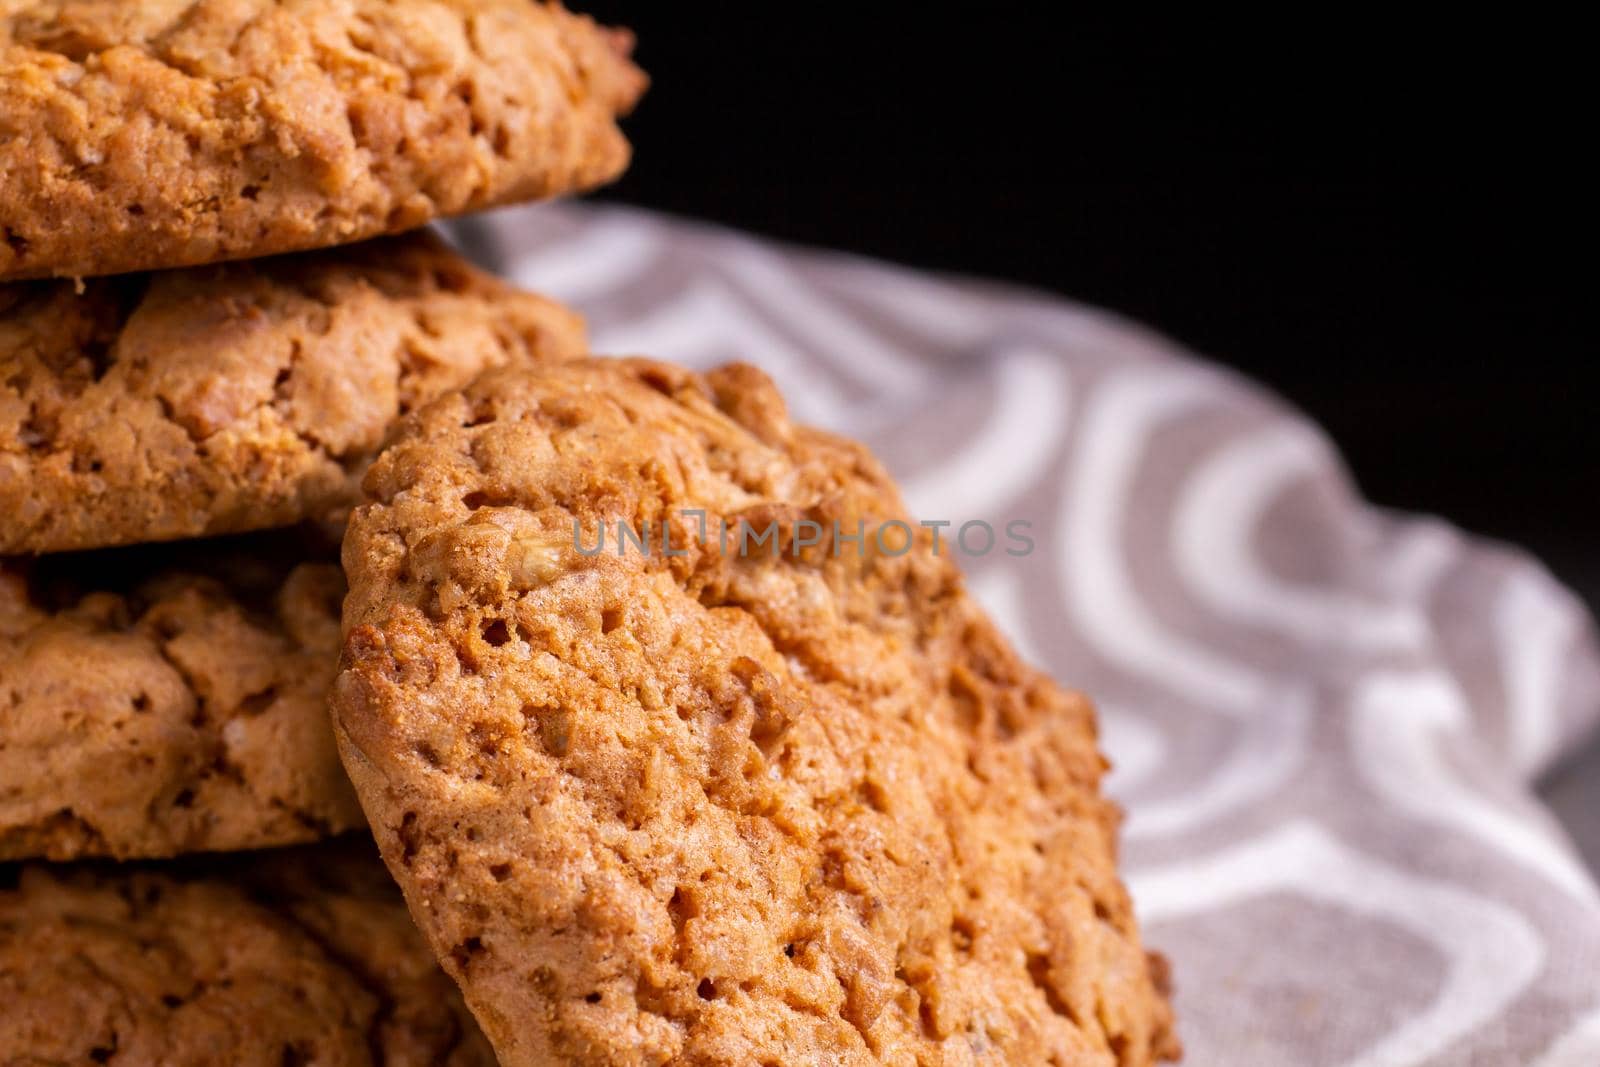 A stack of oatmeal cookies on a kitchen napkin on a wooden table against the dark background by bySergPo